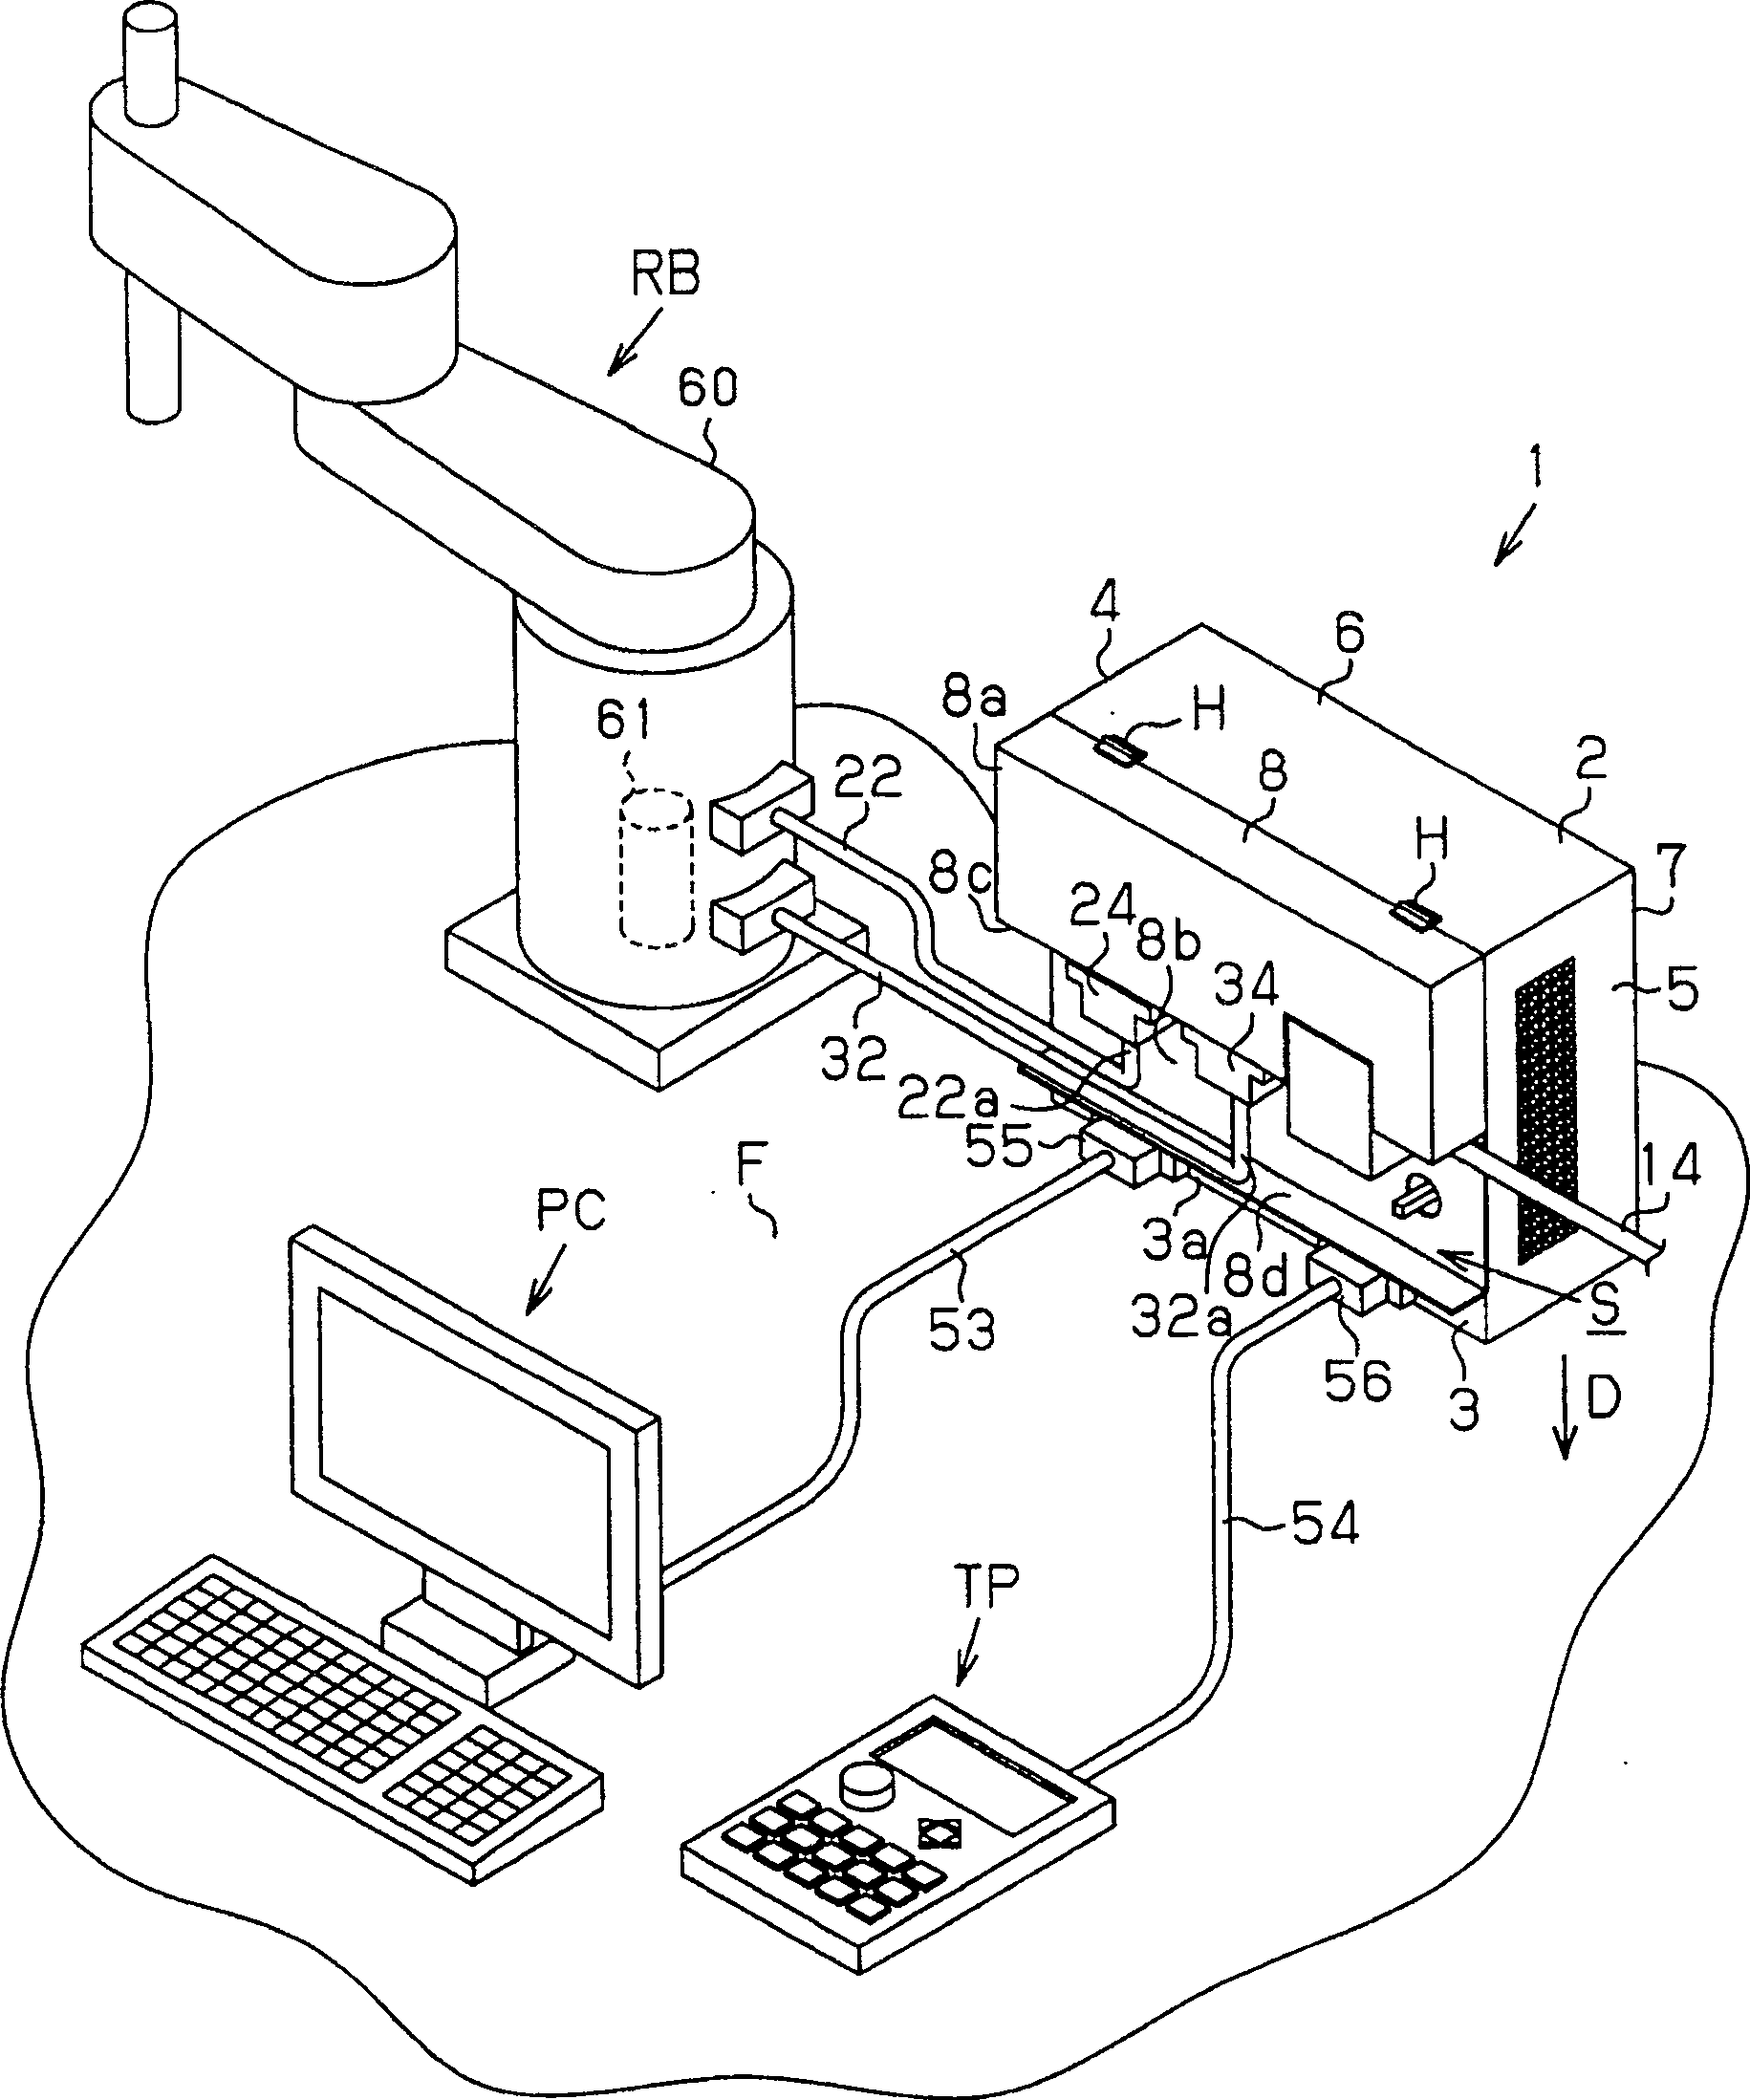 Robot control device and robot system